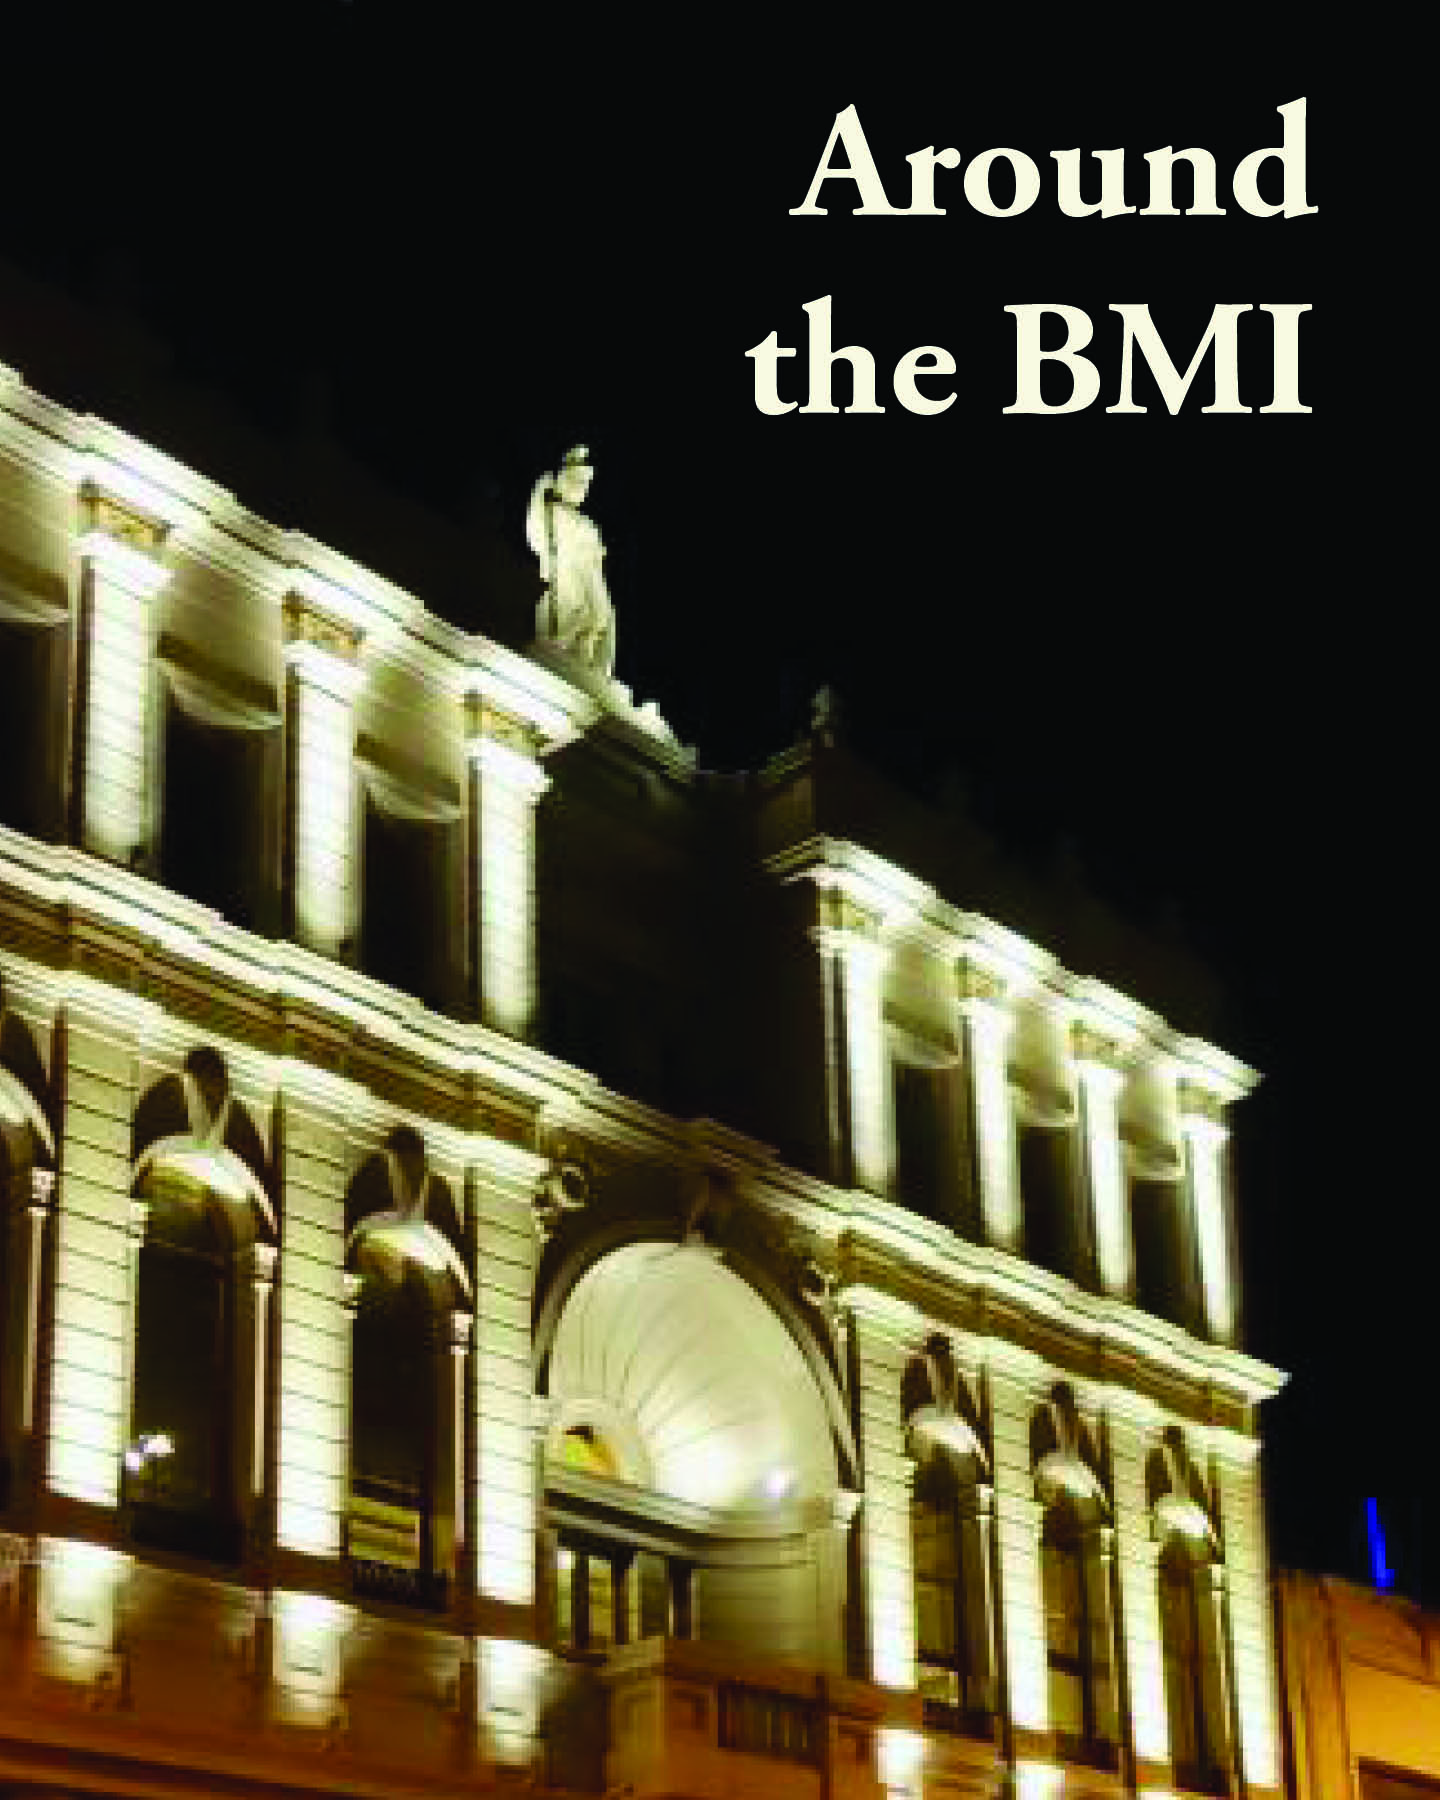 image of the BMI at night, lighting projected up to a black sky